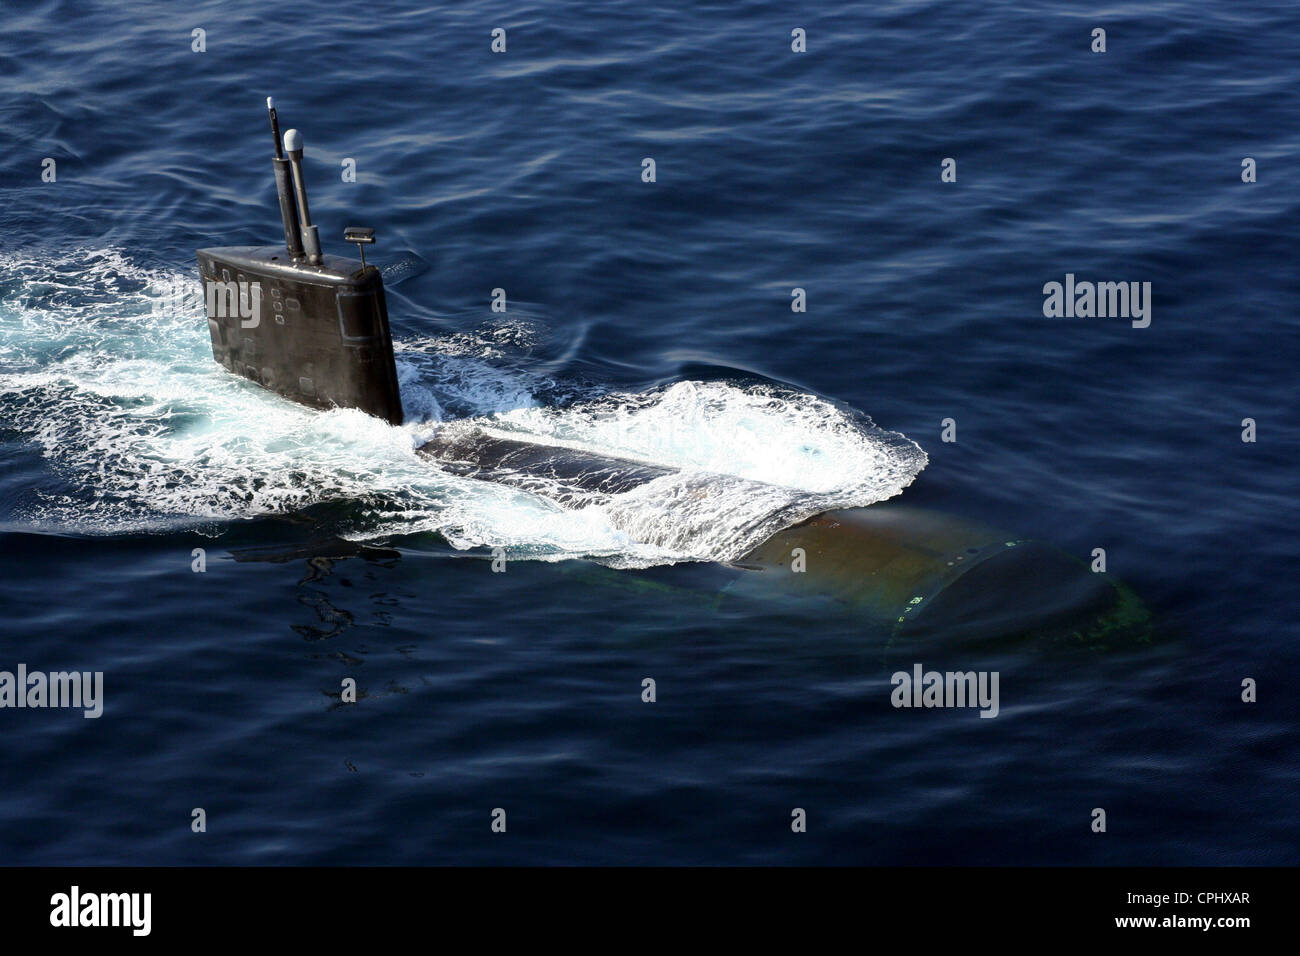 The Los Angeles-class nuclear powered fast attack submarine USS Miami (SSN 755) surfaces during an anti-submarine warfare exercise November 11, 2007 in the North Arabian Sea. Stock Photo